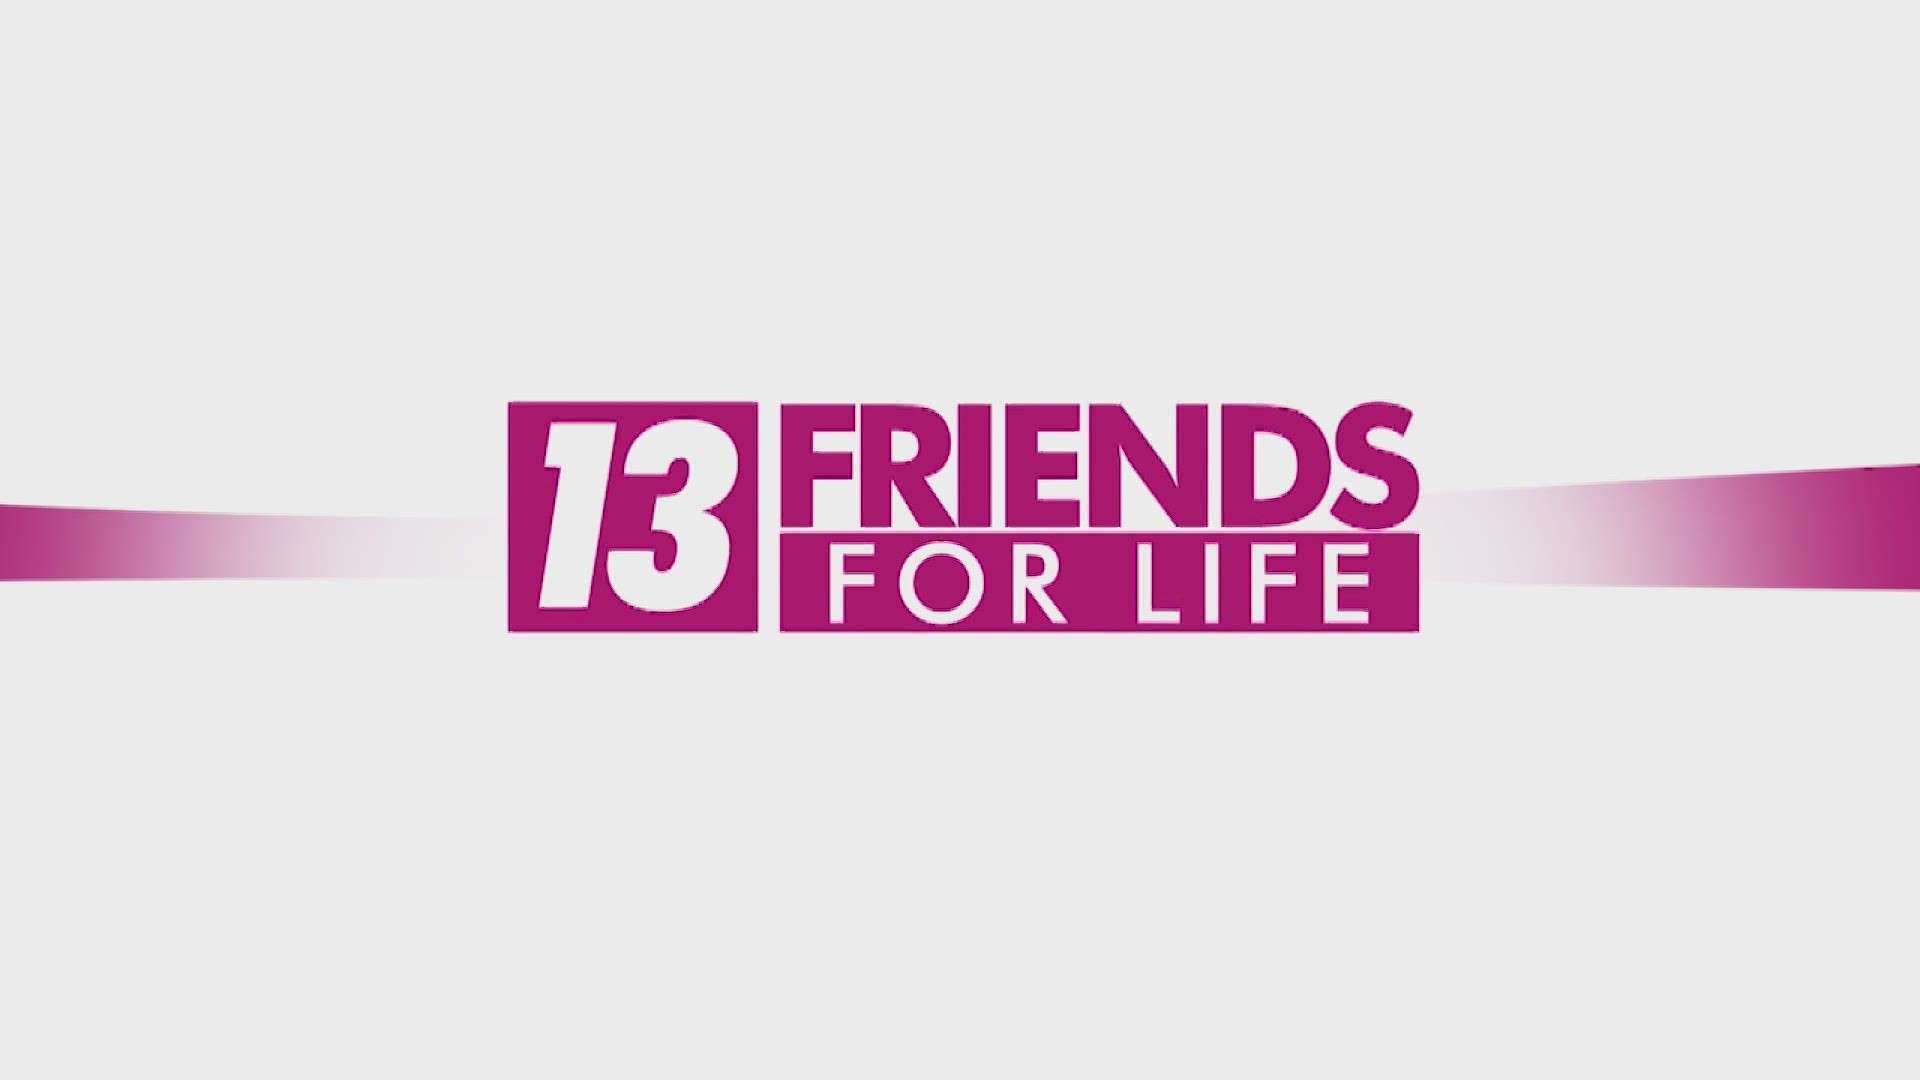 It's 13 Friends For Life Day and it's time to remind your friend for life to schedule her yearly mammogram.